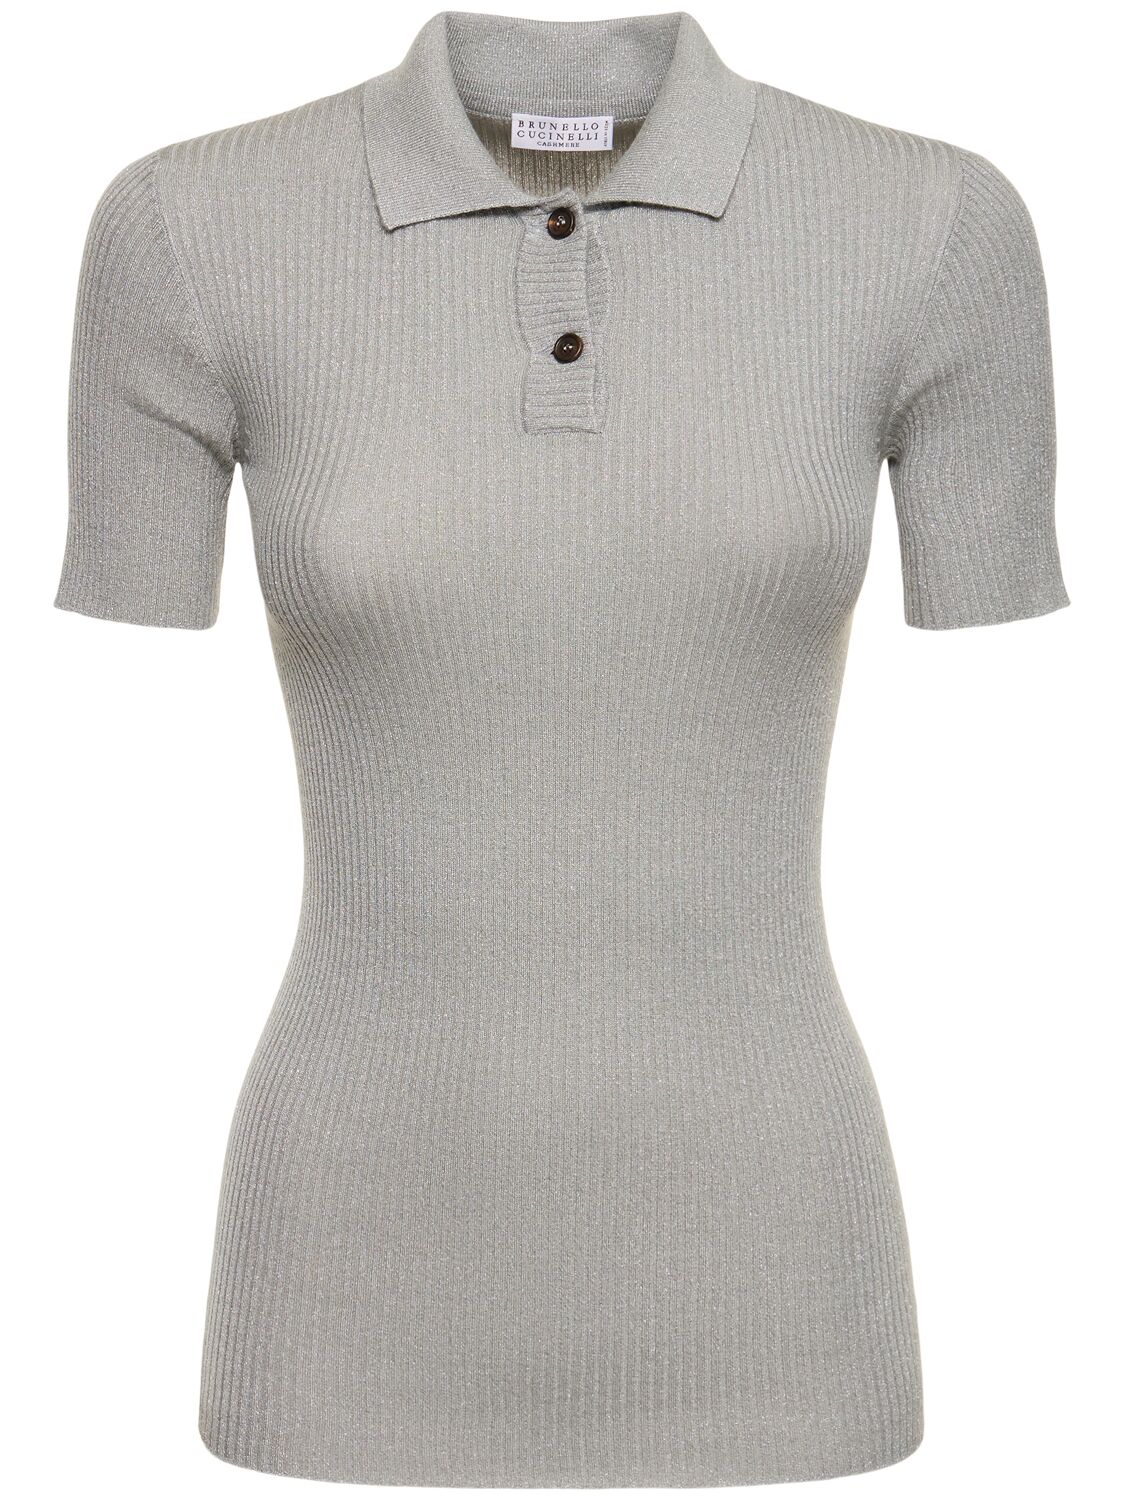 Image of Rib Knit Cashmere Blend Polo Top